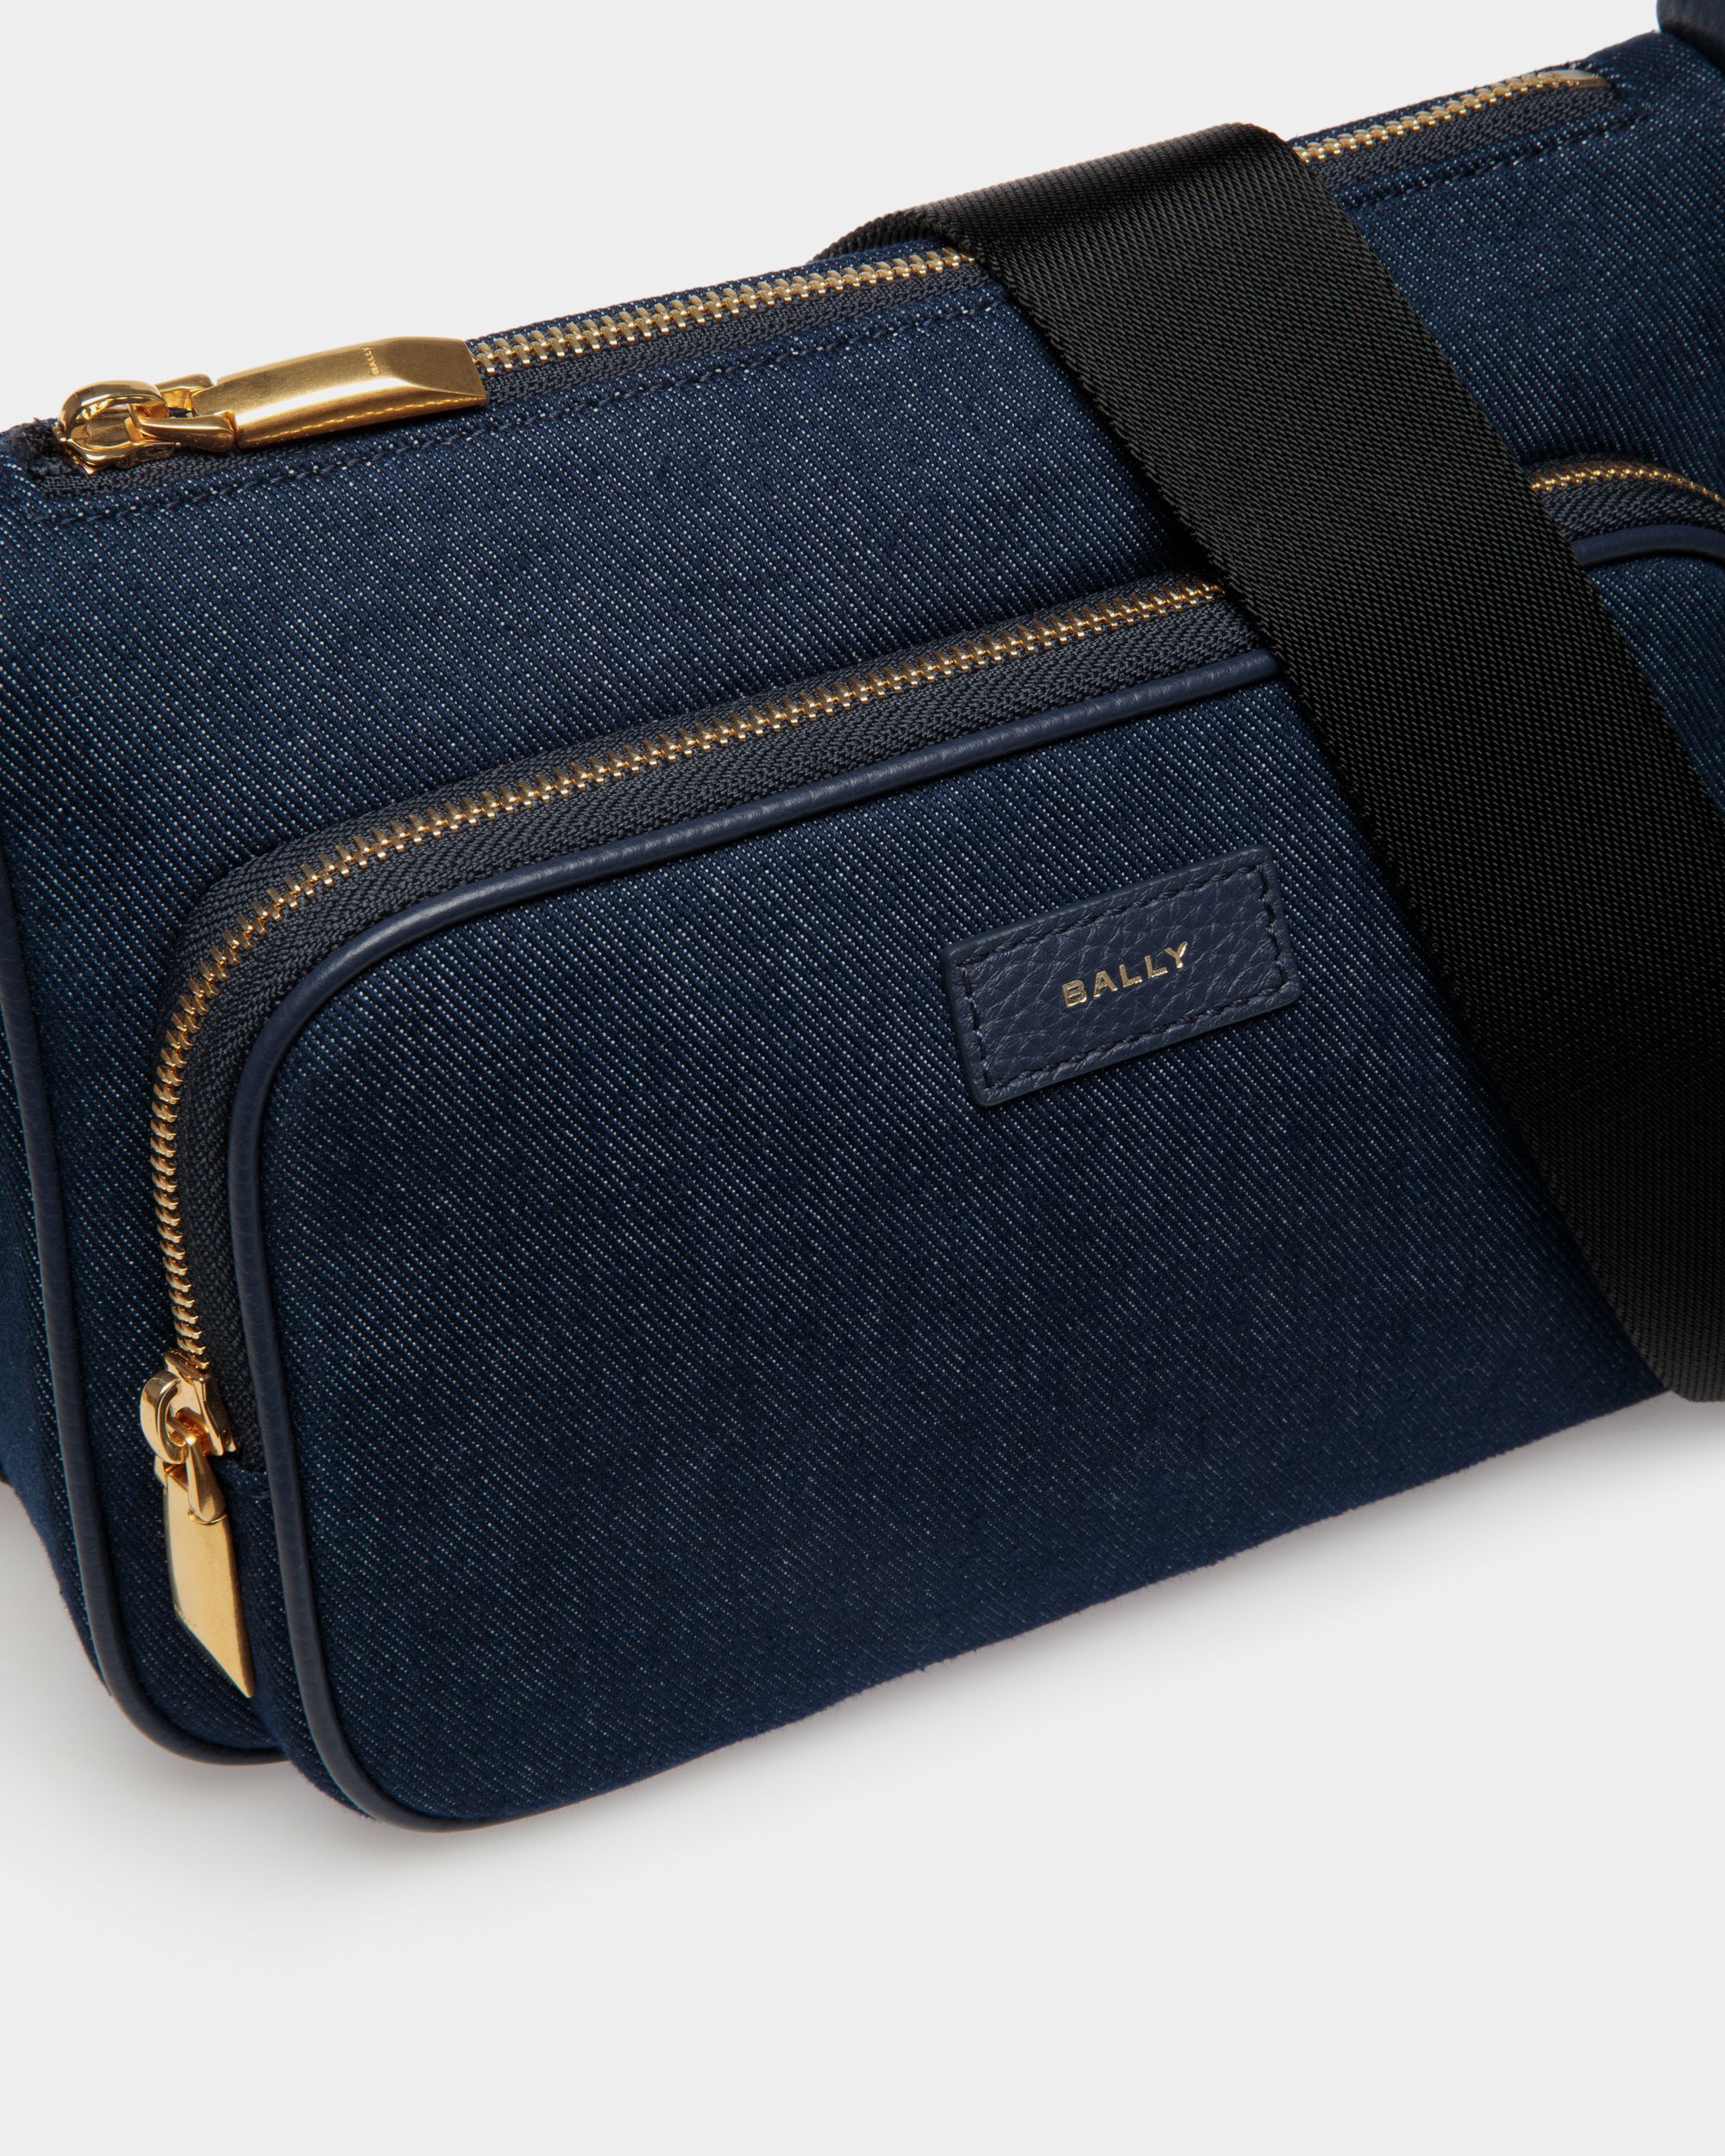 Bar | Men's Crossbody Bag in Blue Canvas And Leather | Bally | Still Life Detail